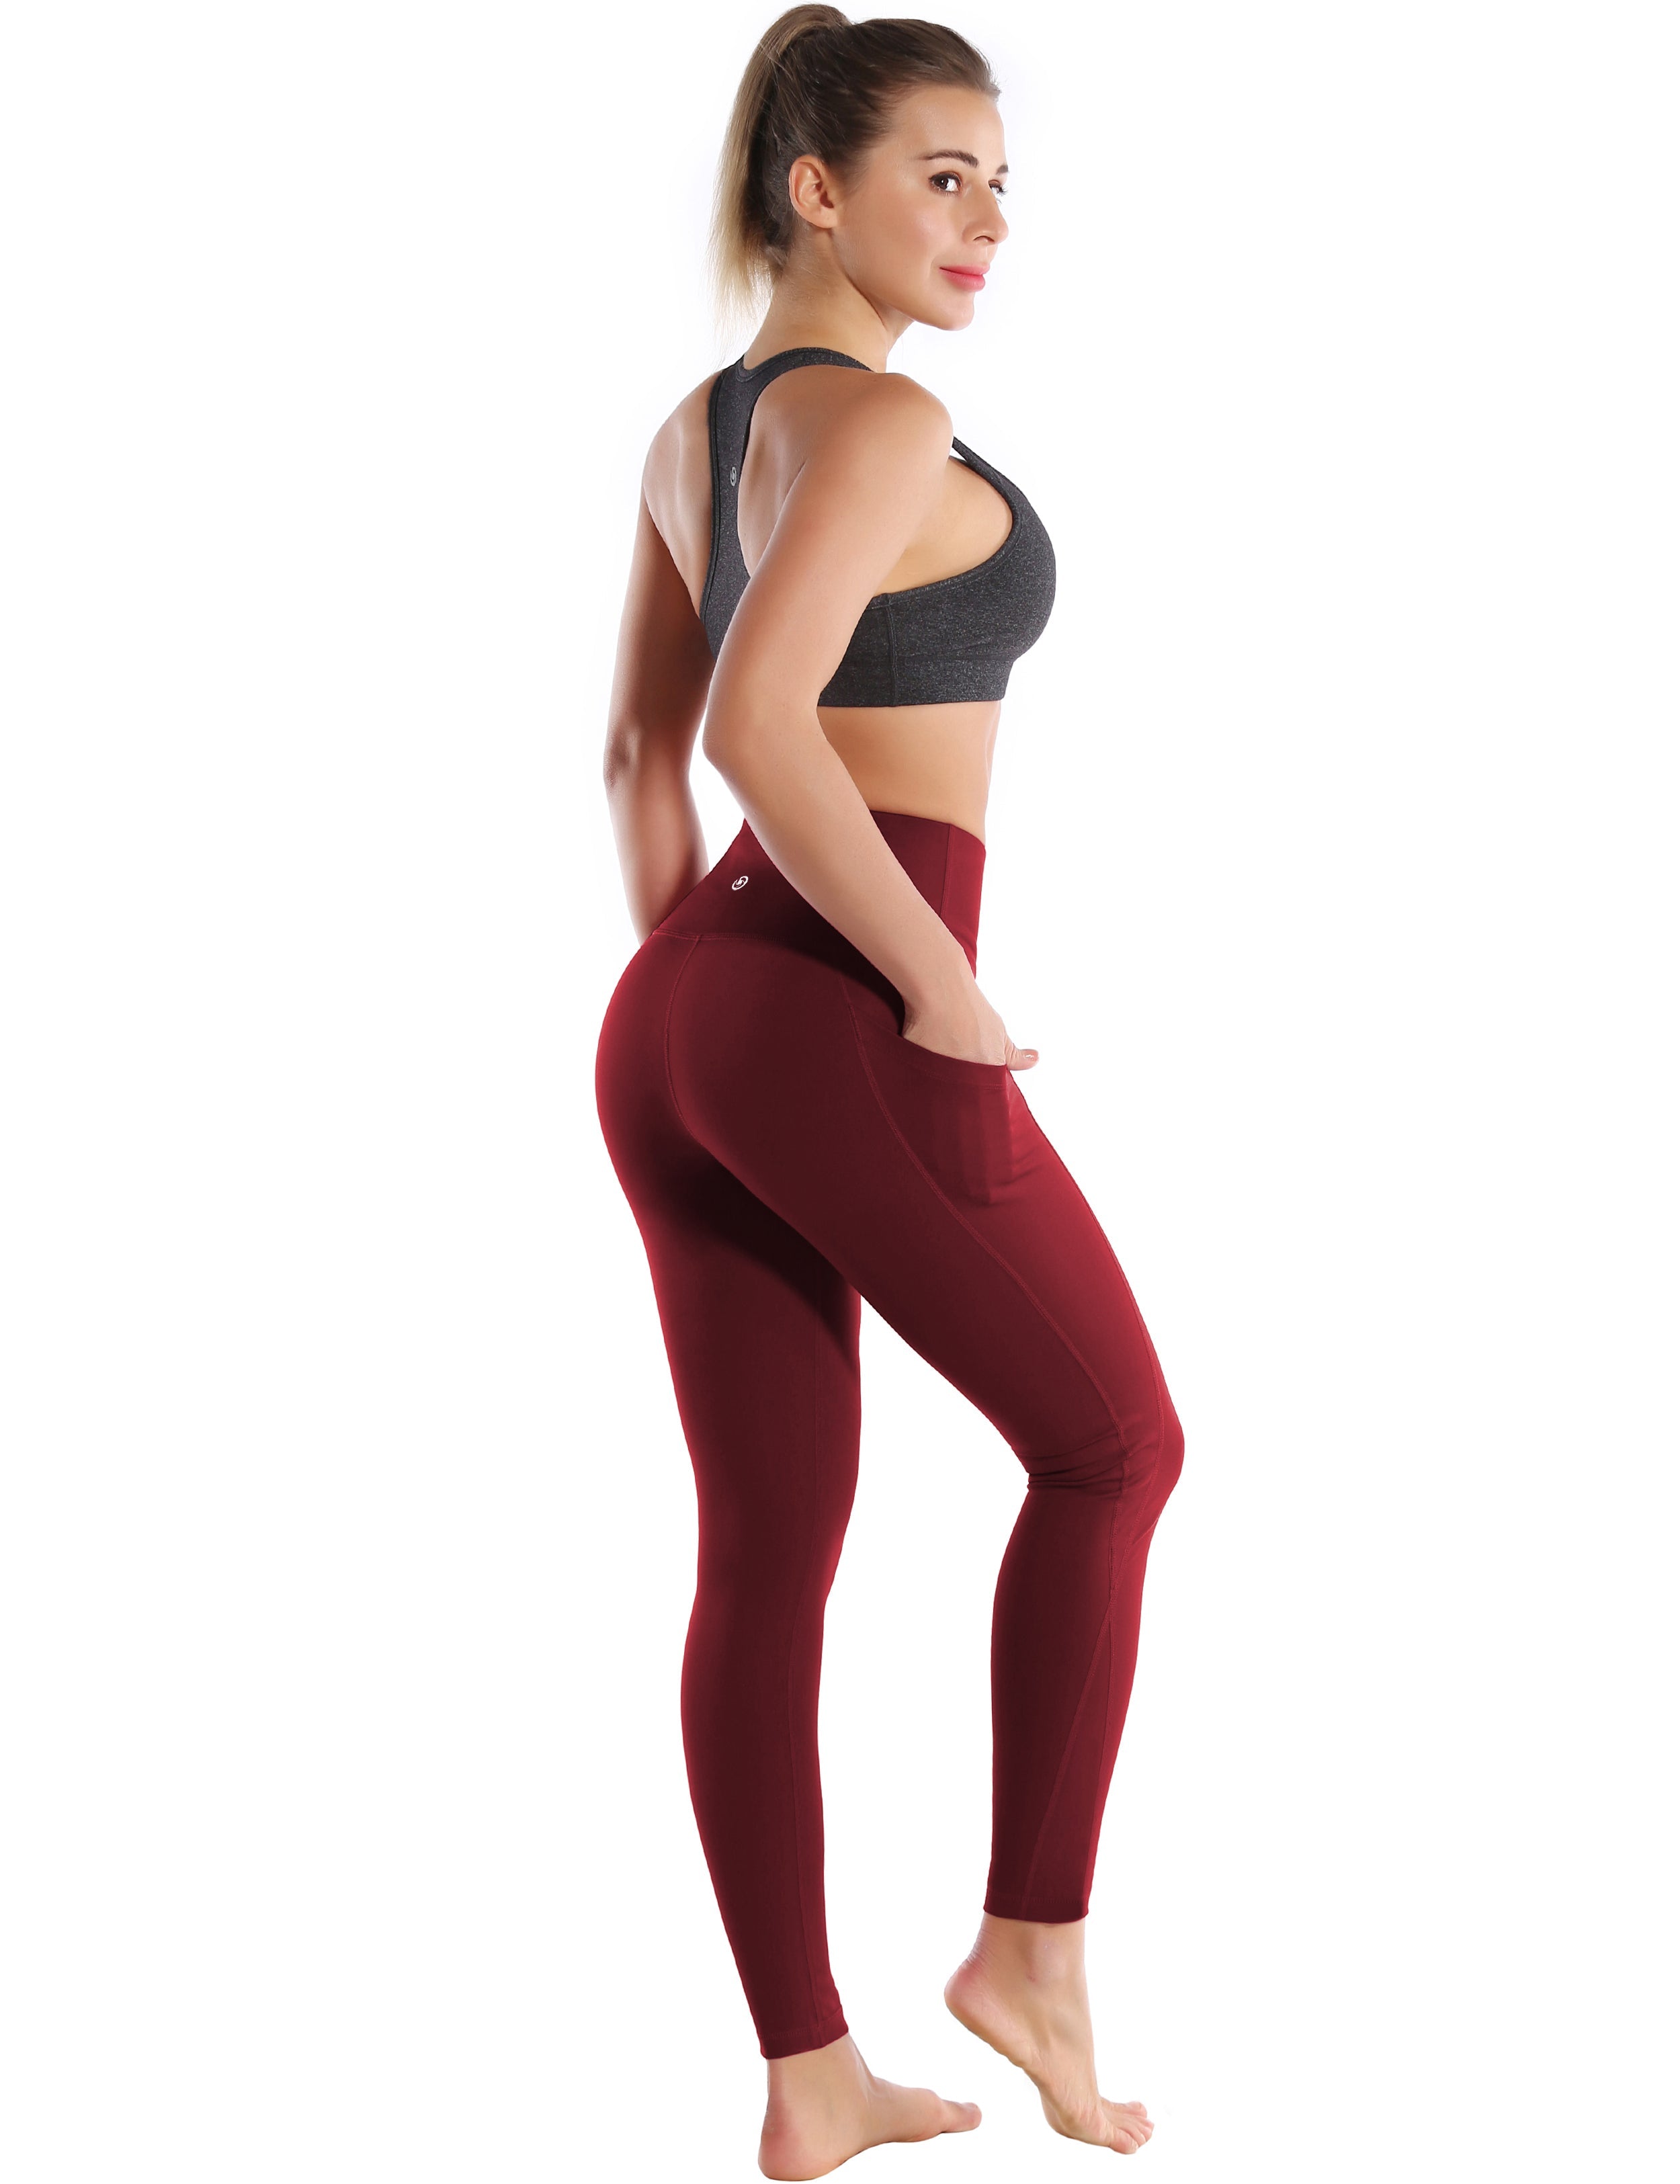 High Waist Side Pockets Biking Pants cherryred 75% Nylon, 25% Spandex Fabric doesn't attract lint easily 4-way stretch No see-through Moisture-wicking Tummy control Inner pocket